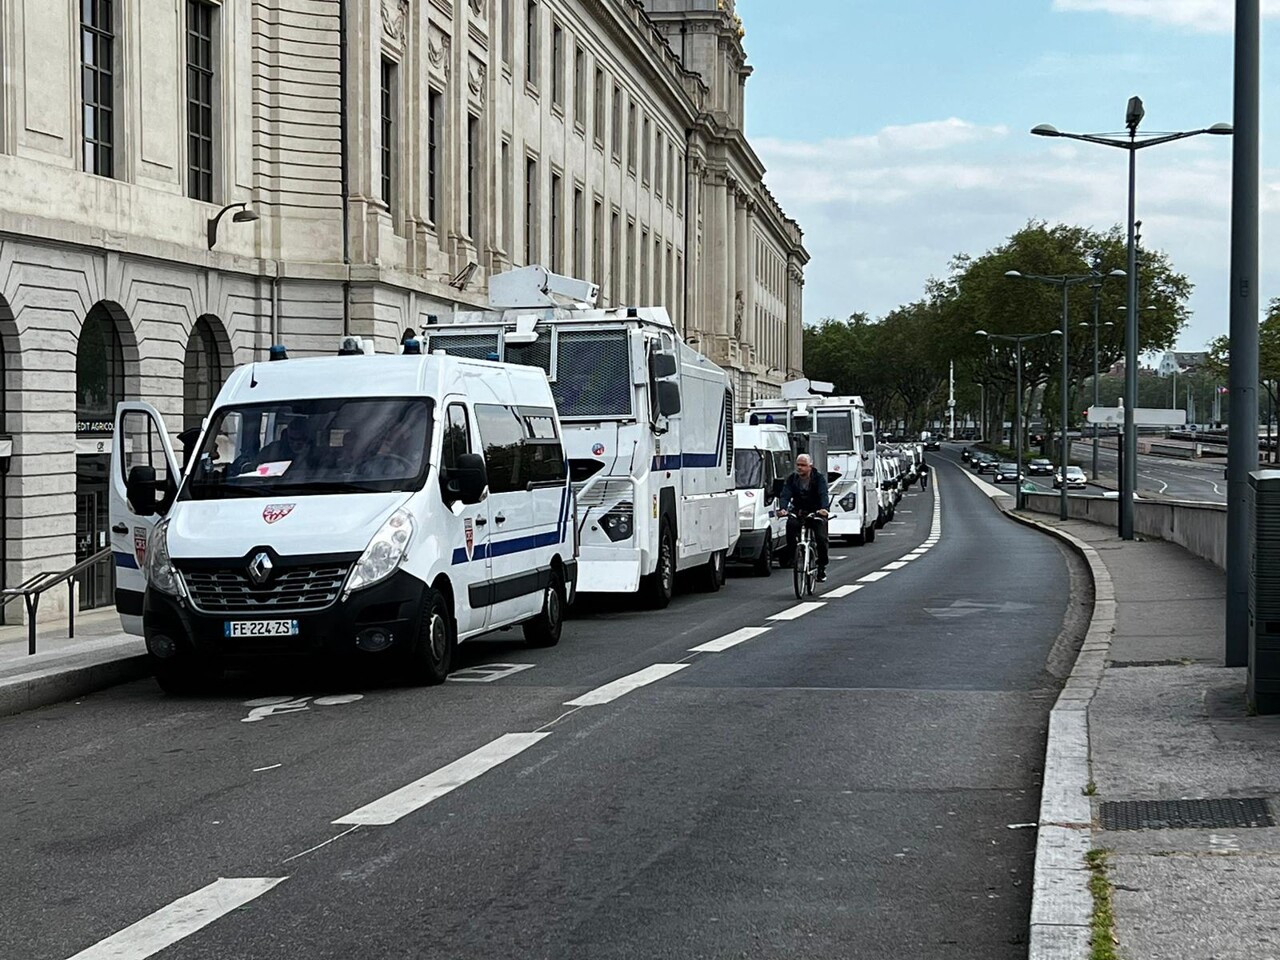 The police positioned in front of the Hôtel Dieu, near Place Bellecour, the place of arrival of the May Day demonstration in Lyon.